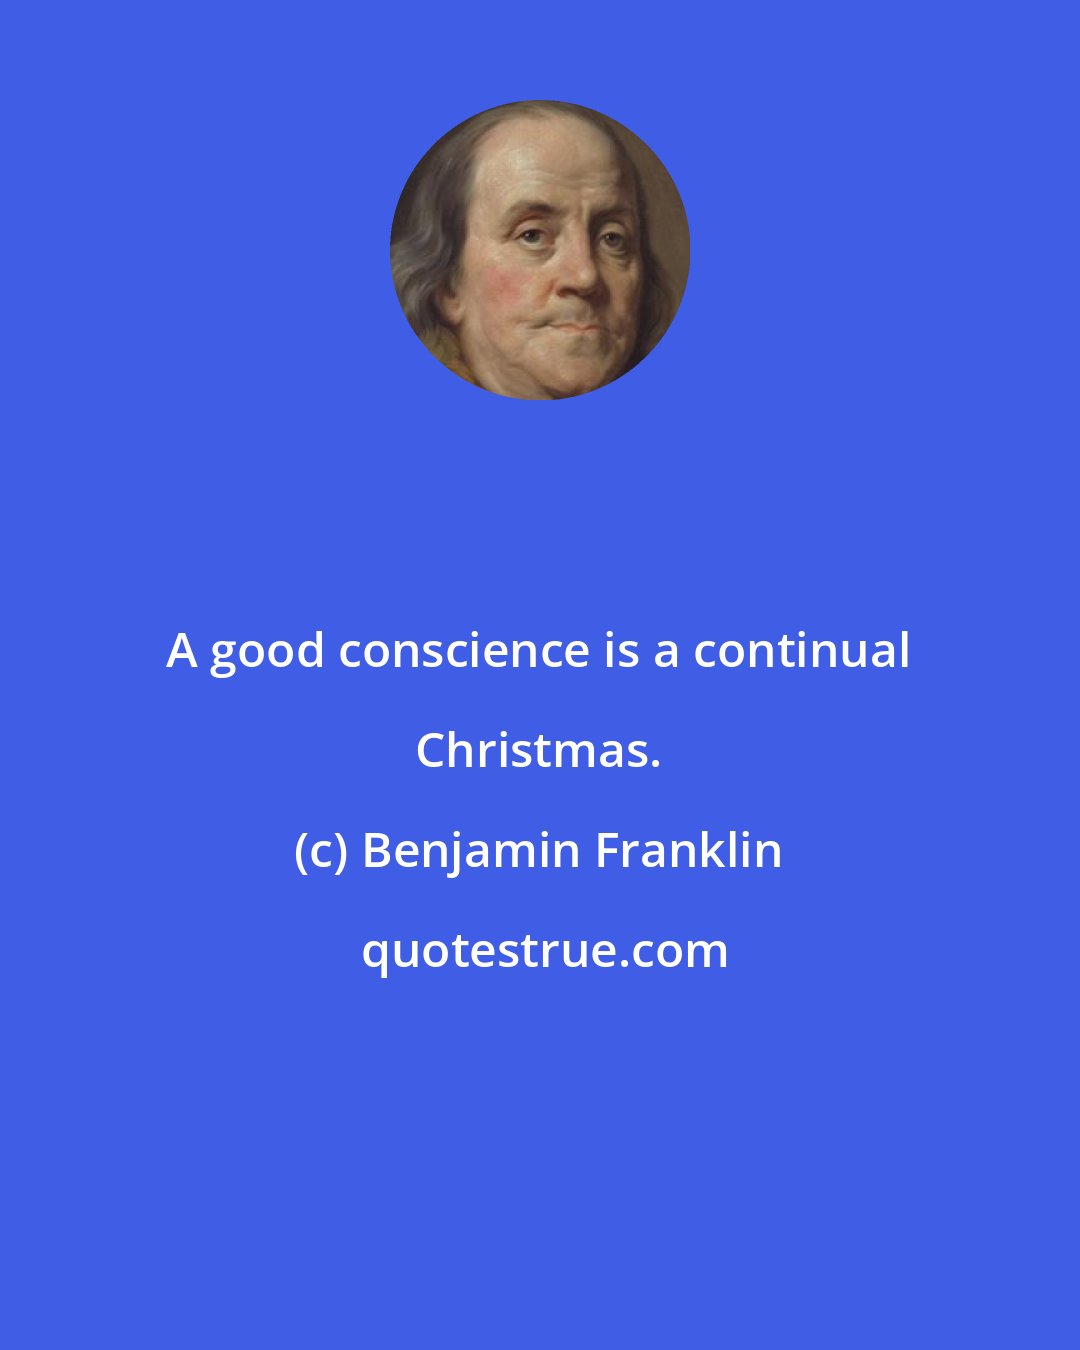 Benjamin Franklin: A good conscience is a continual Christmas.